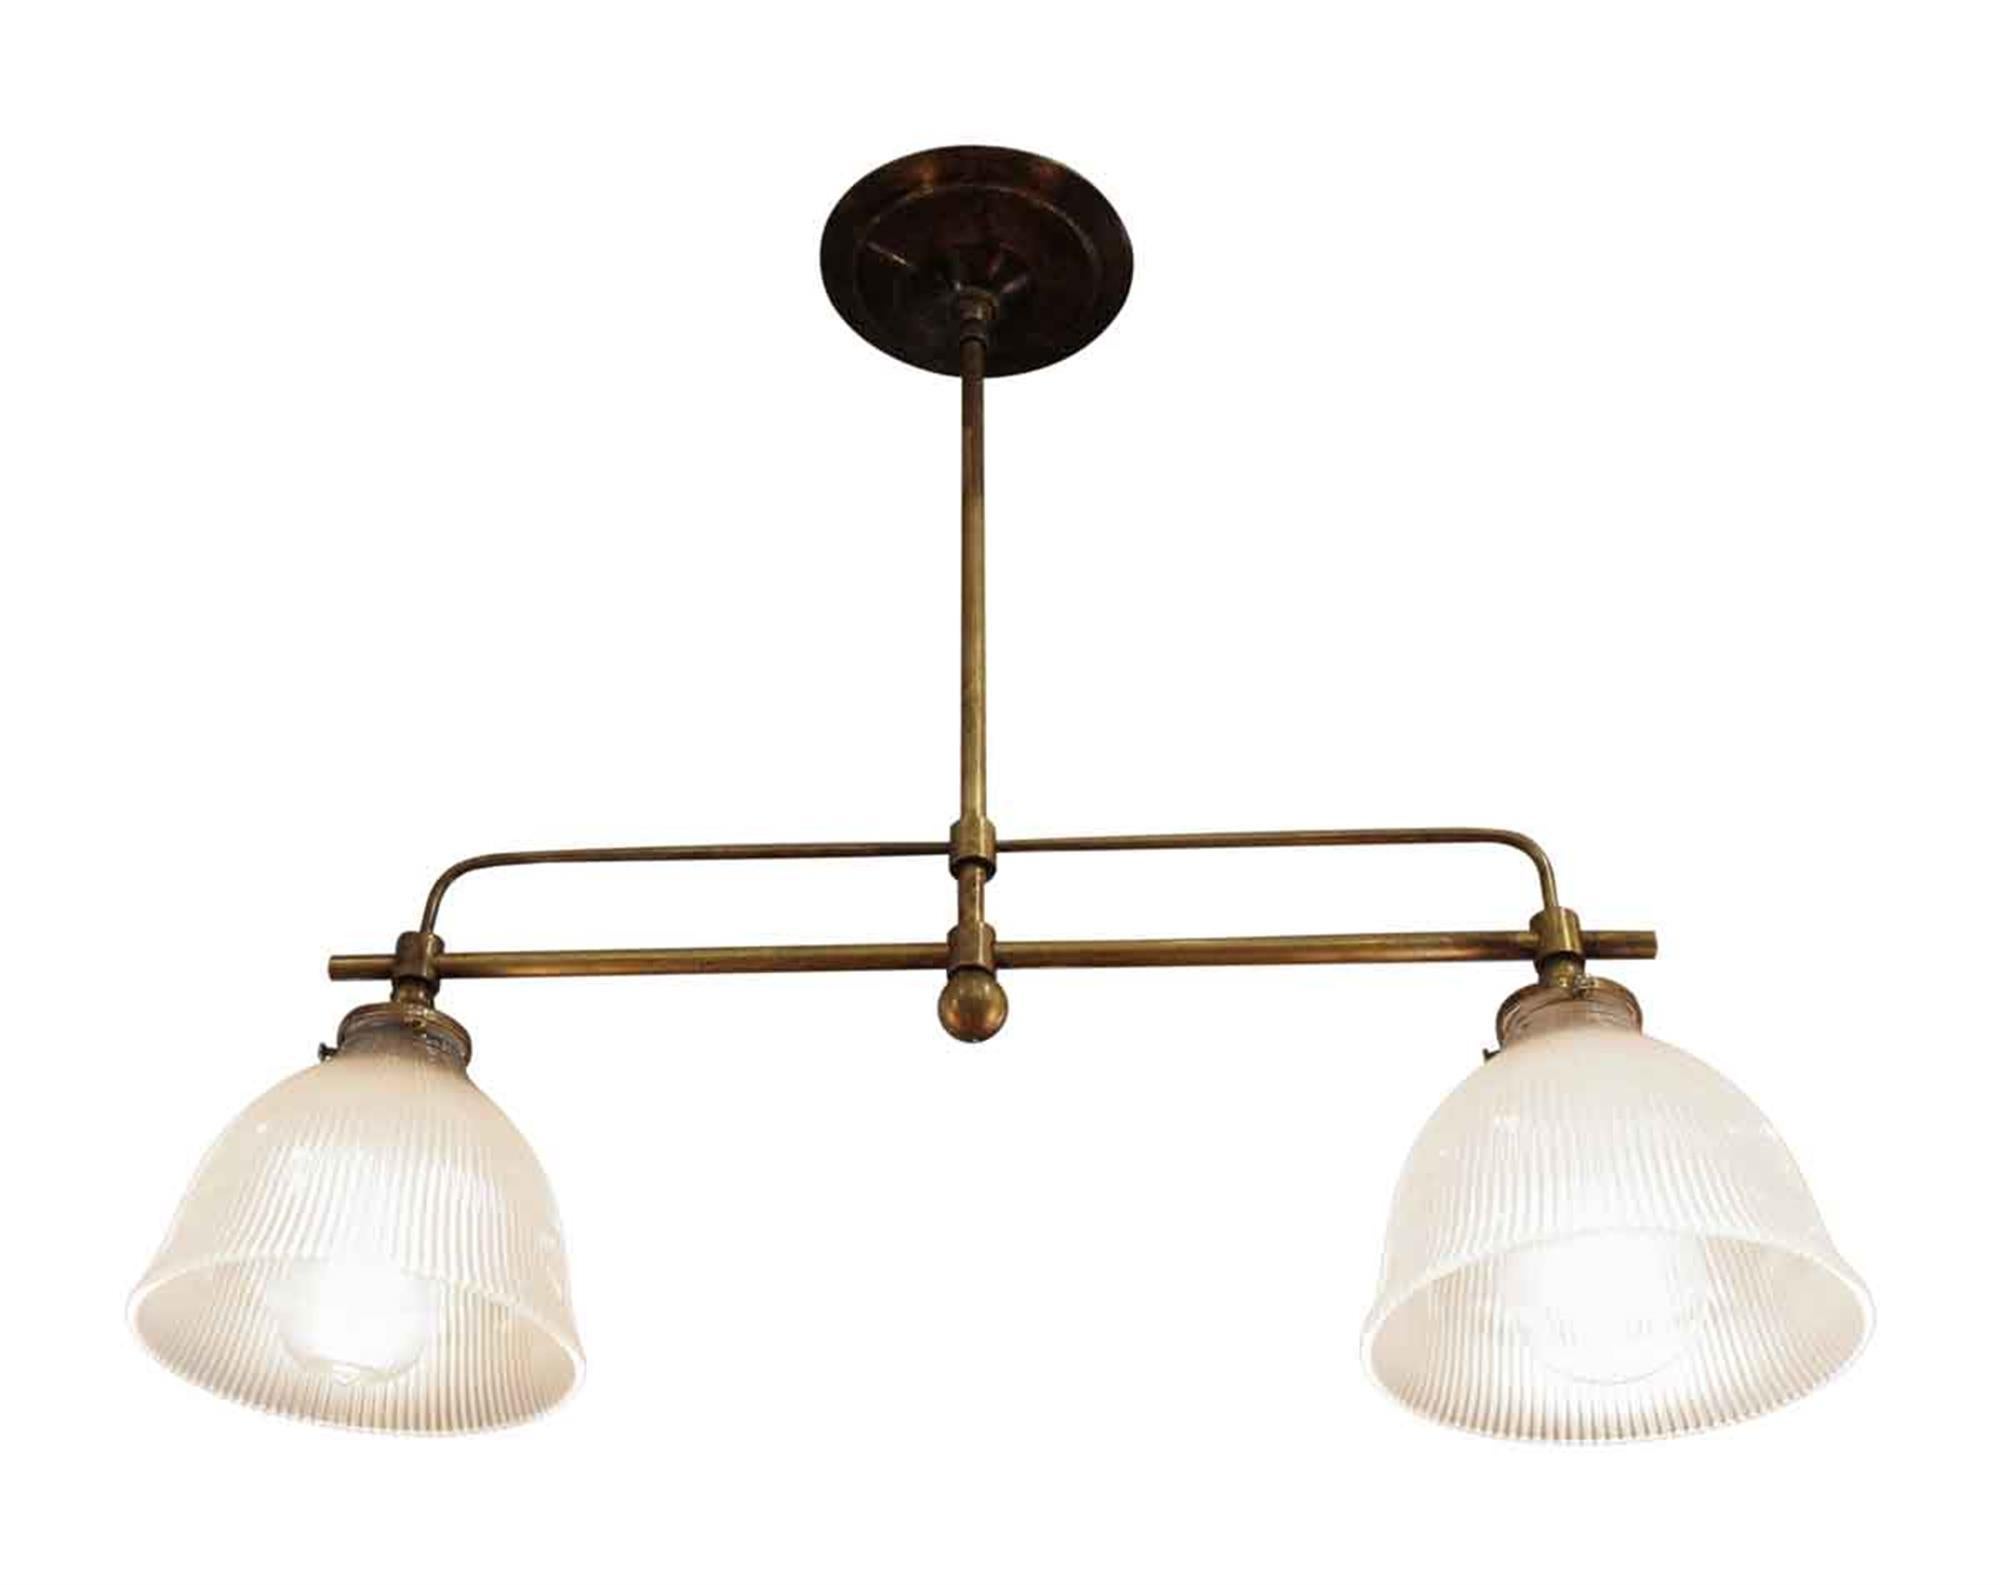 Custom brass double down light fixture with two Holophane glass shades from the 1960s. This can be seen at our 5 East 16th St location on Union Square in Manhattan.